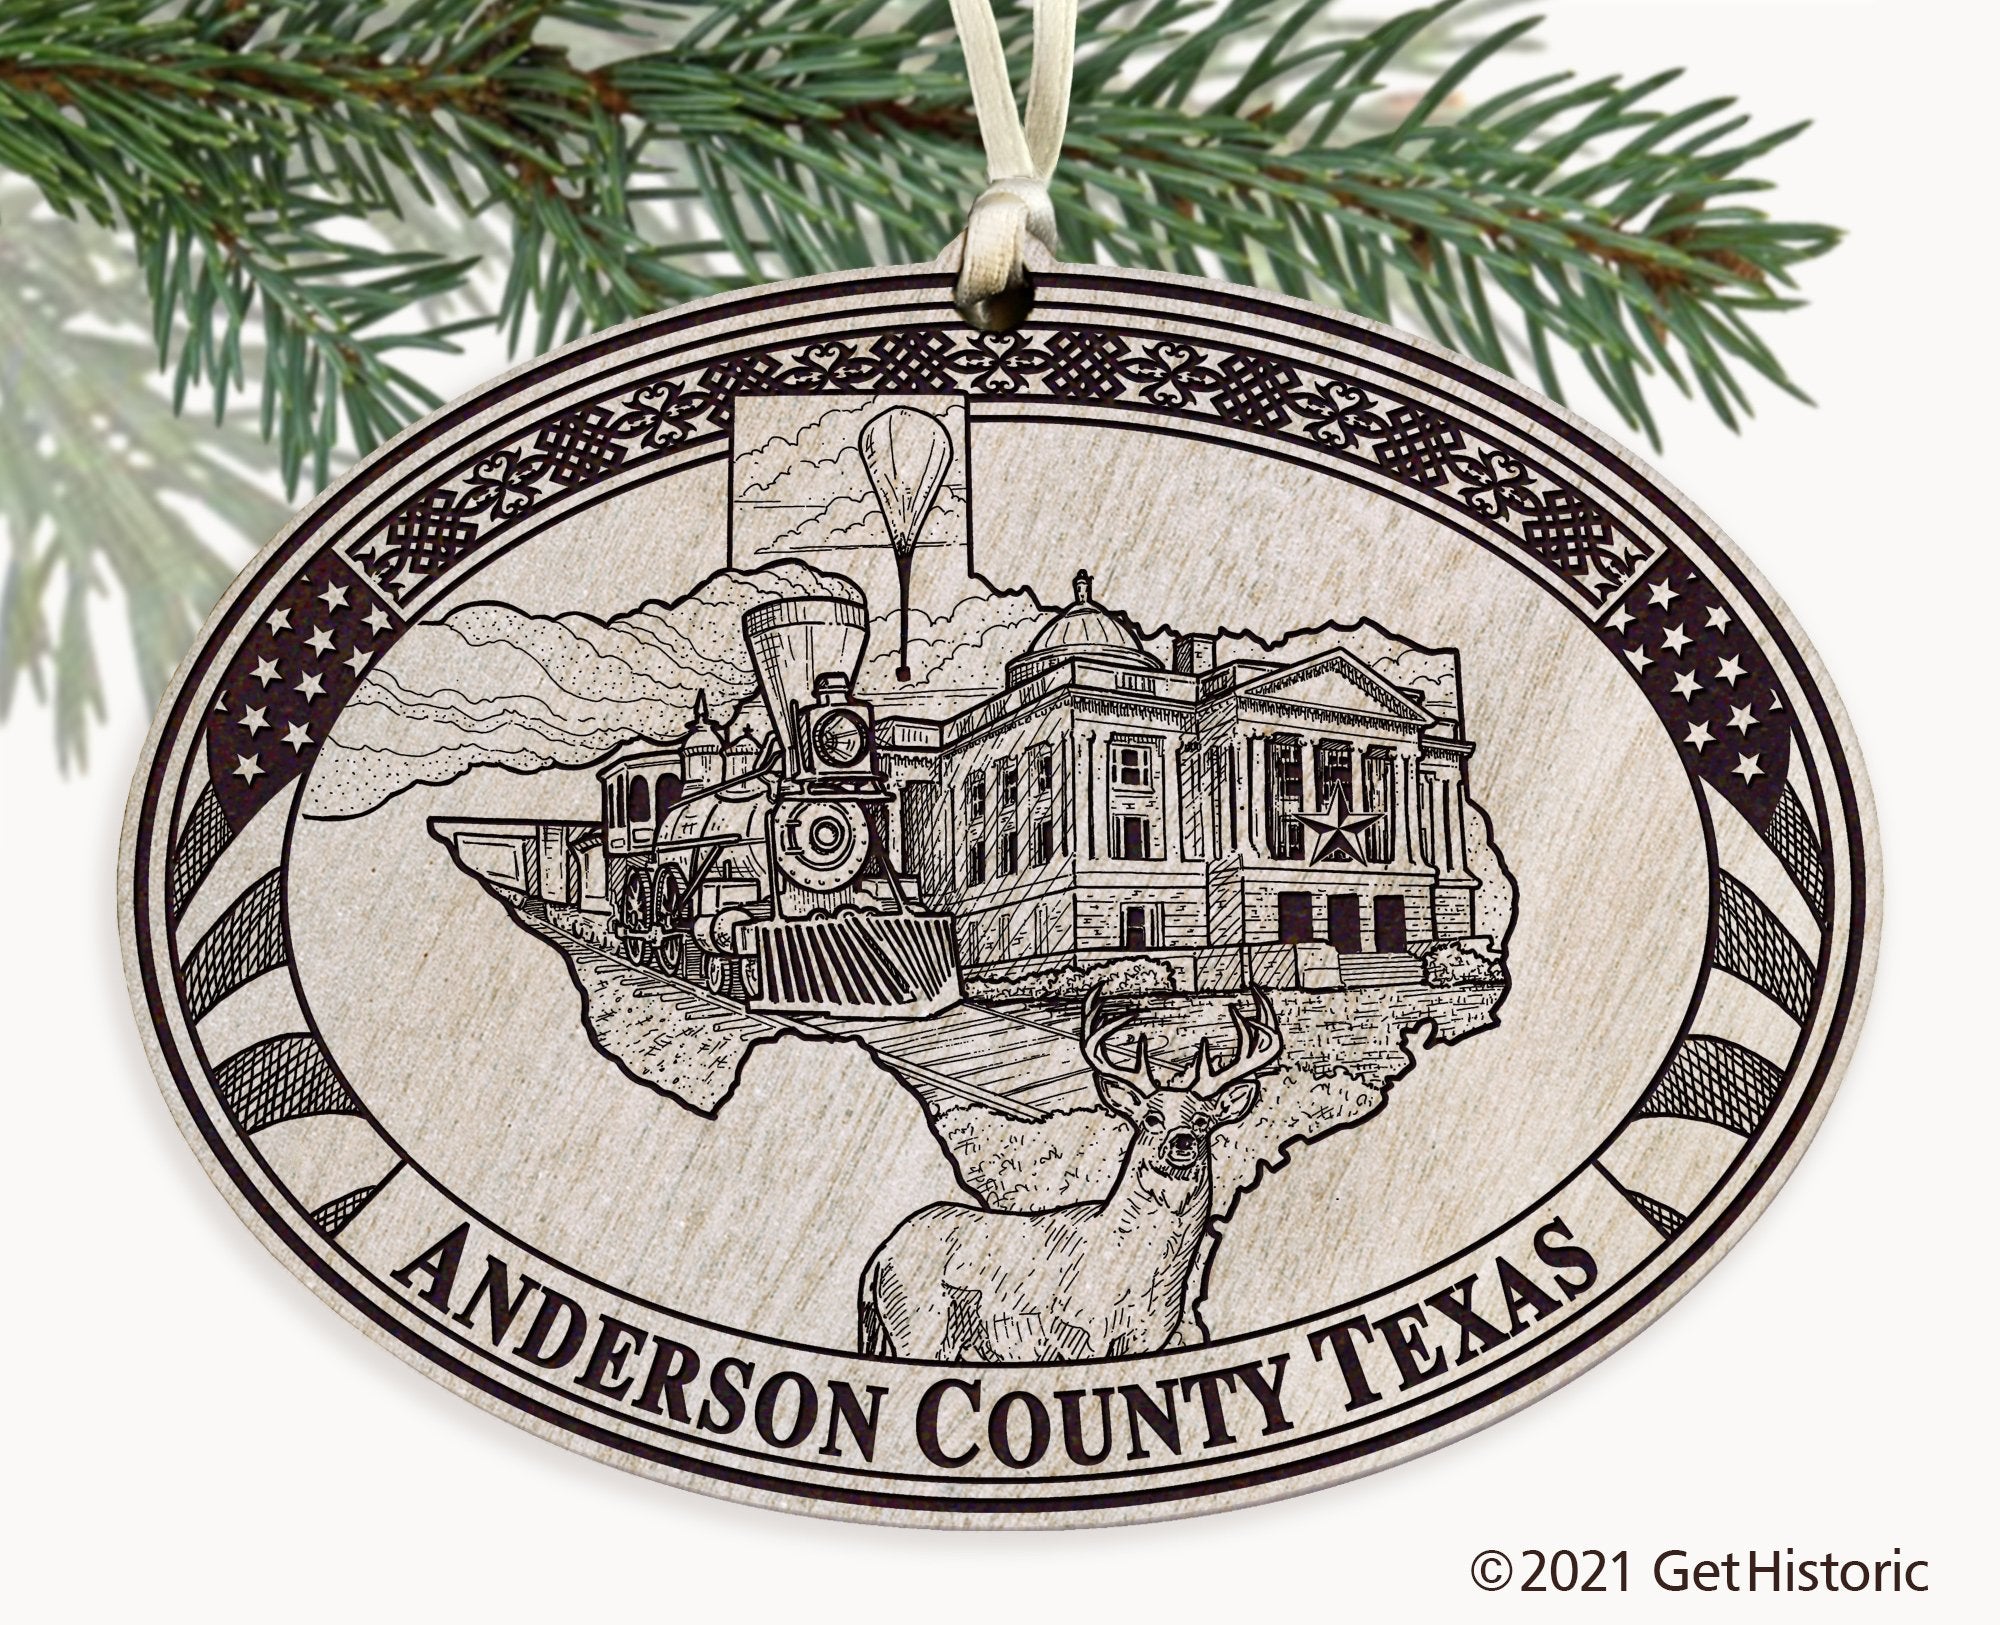 Anderson County Texas Engraved Ornament